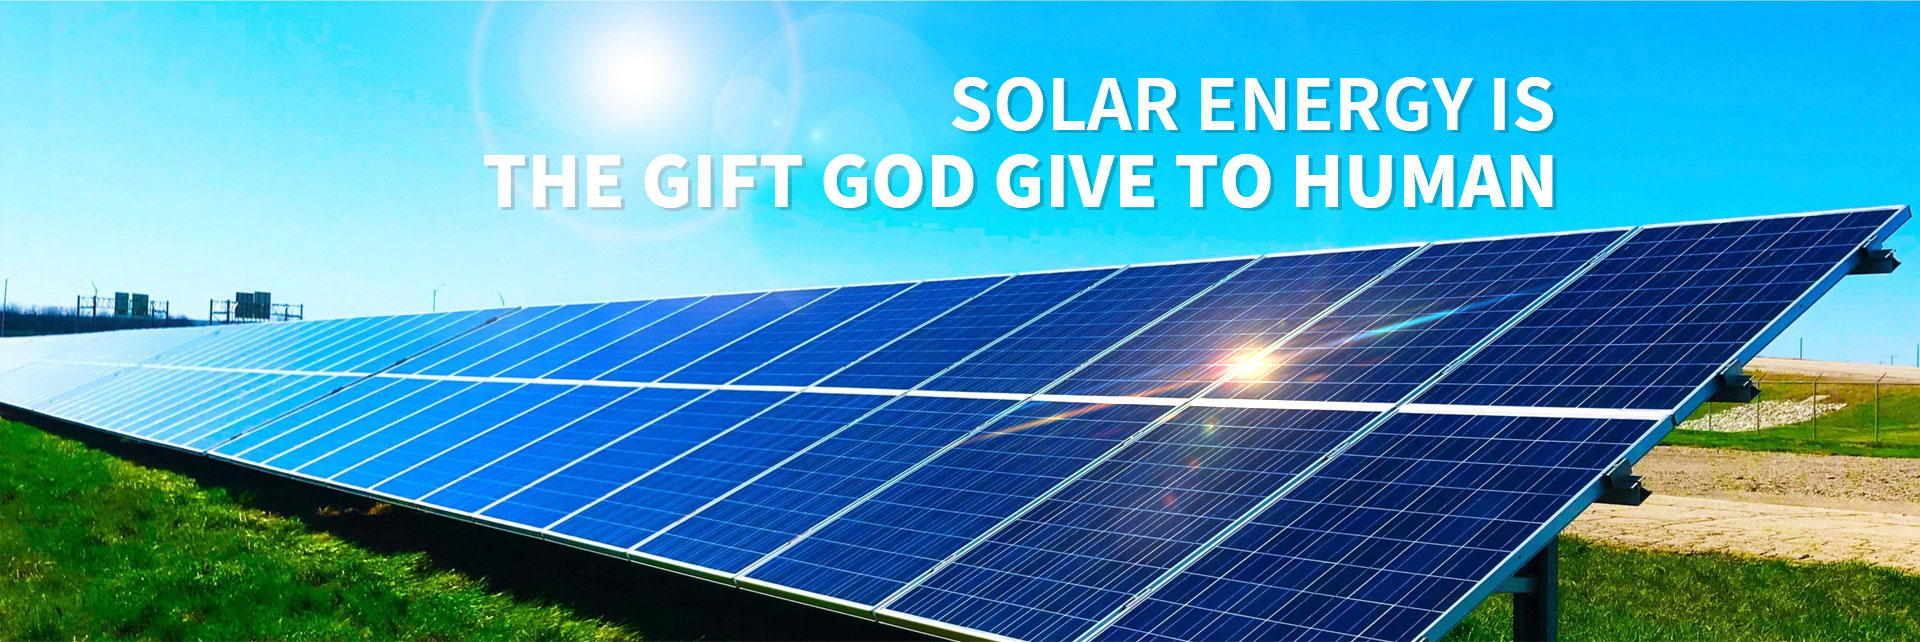 Solar Energy is the gift God give to human. 